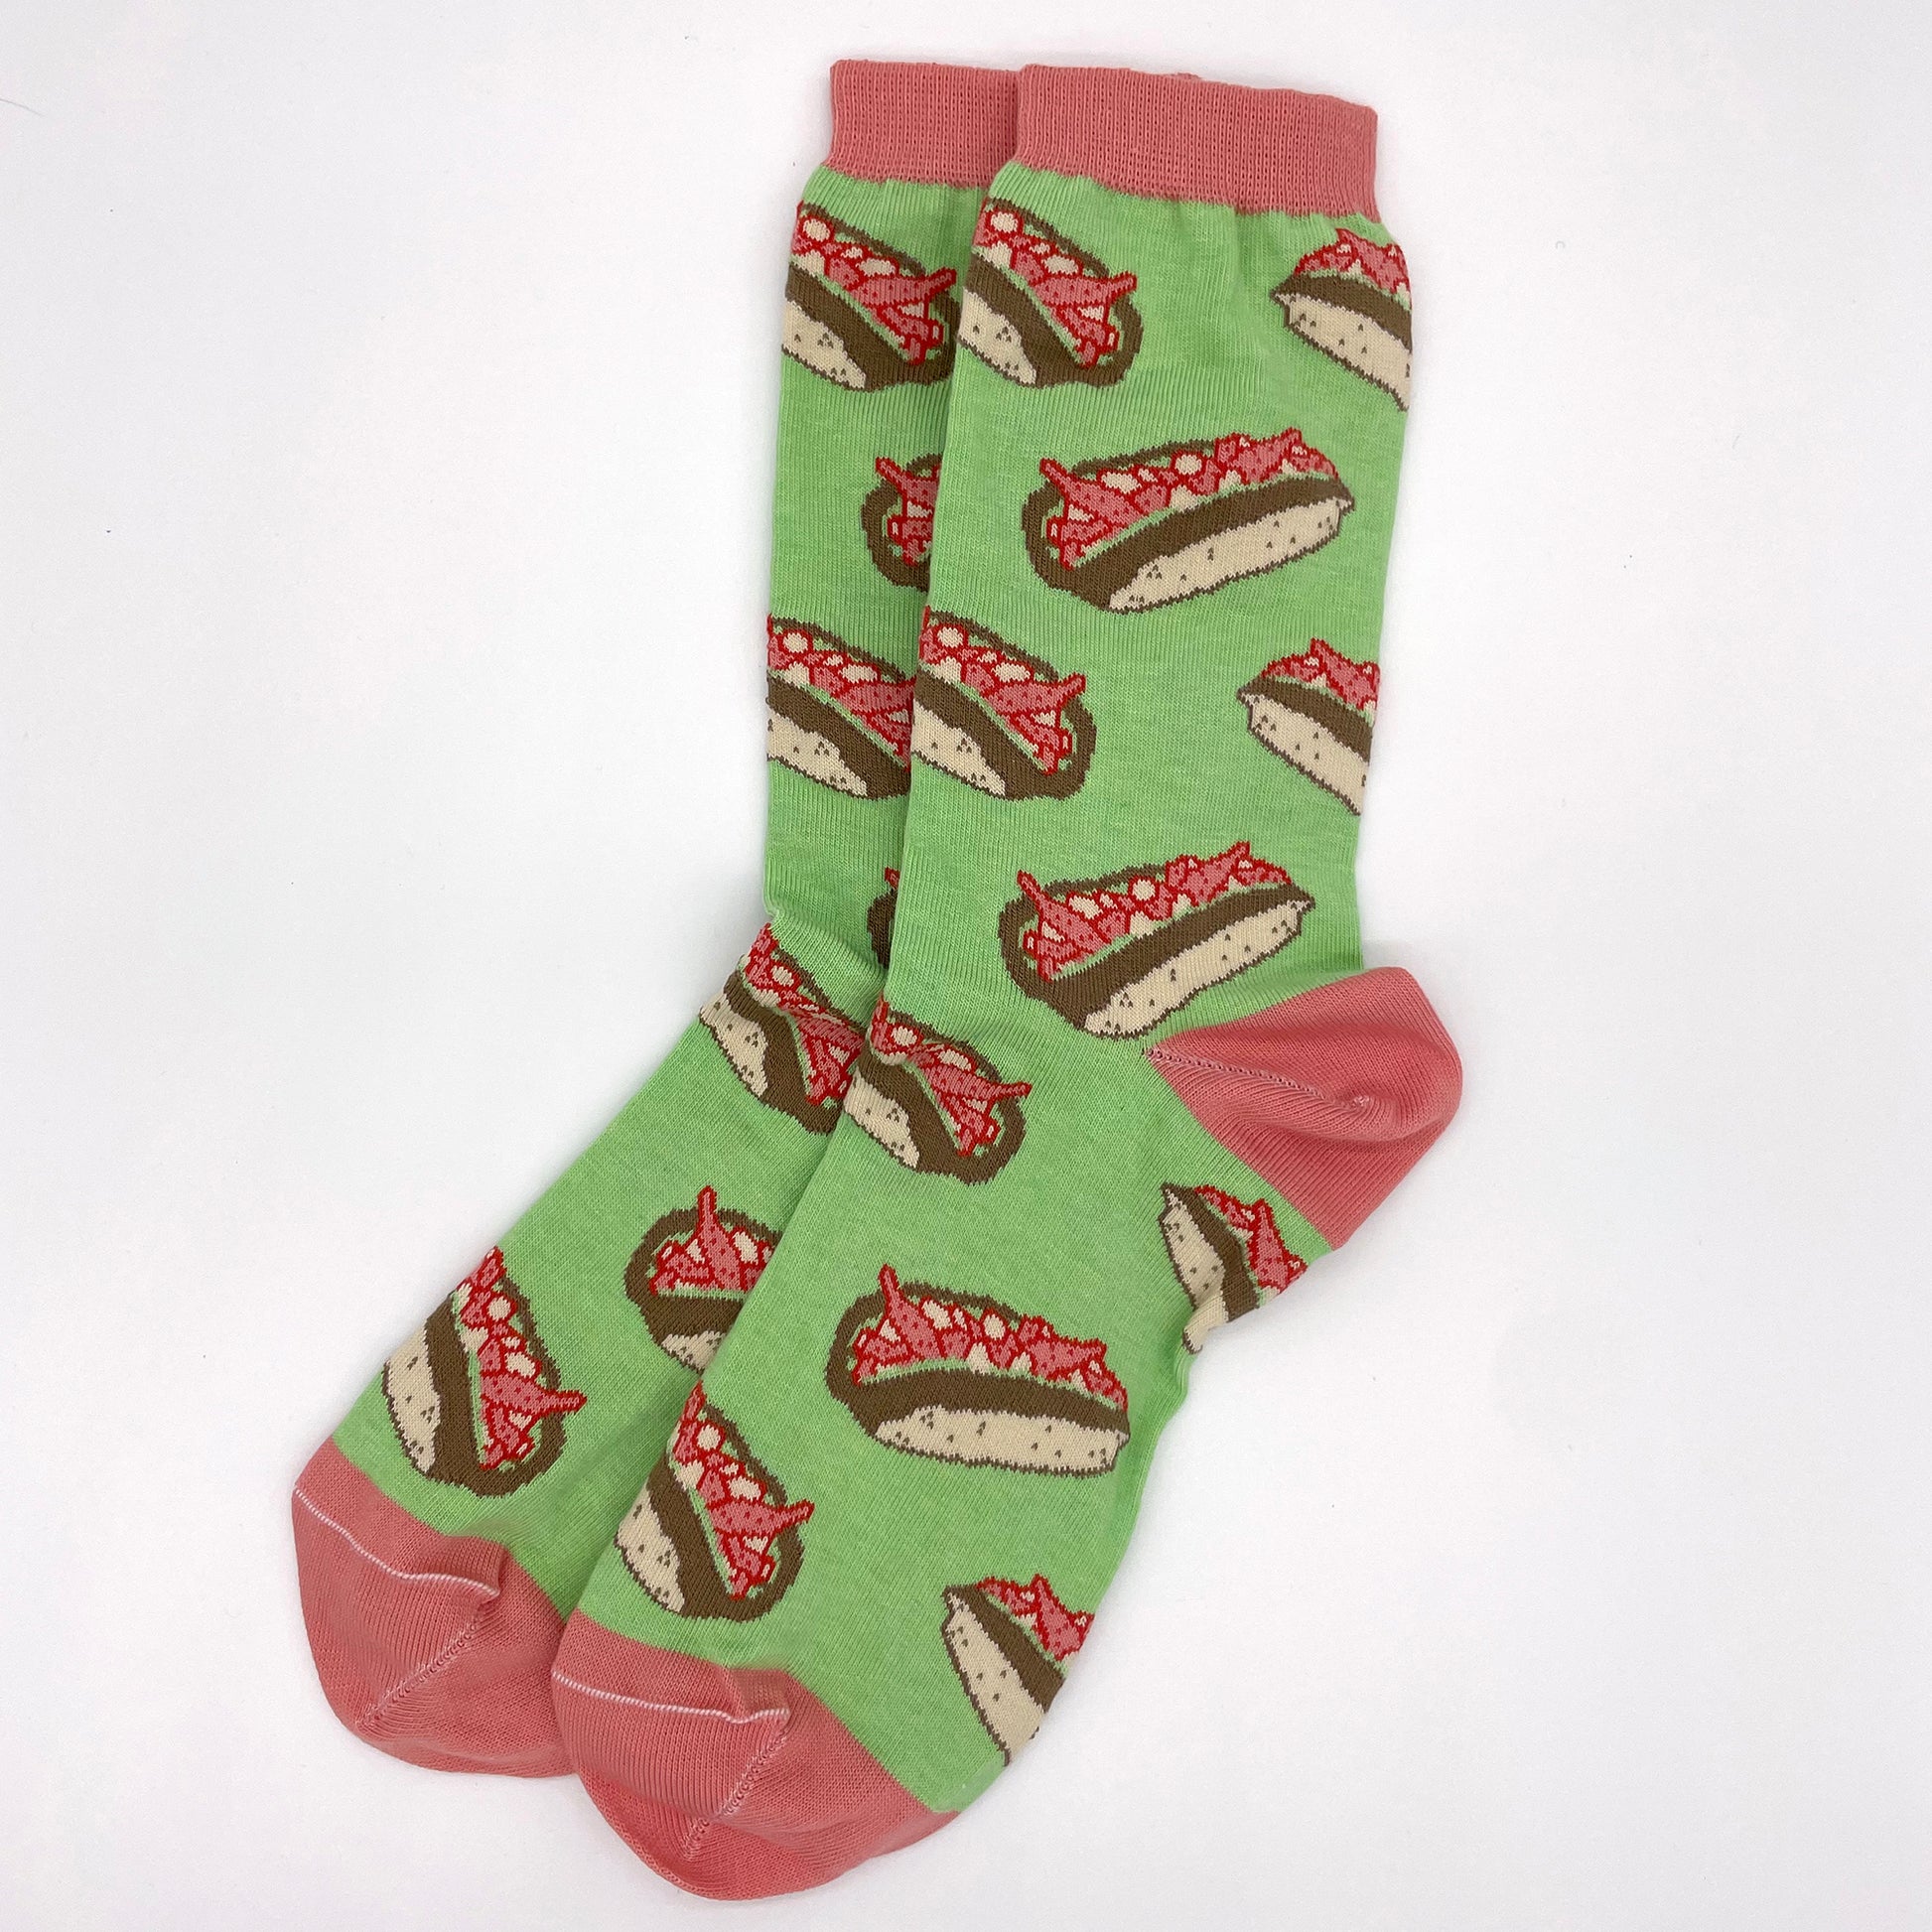 A pair of green socks patterned with lobster rolls lie flat on a white background. The welts, heels and toes of the socks are pink.